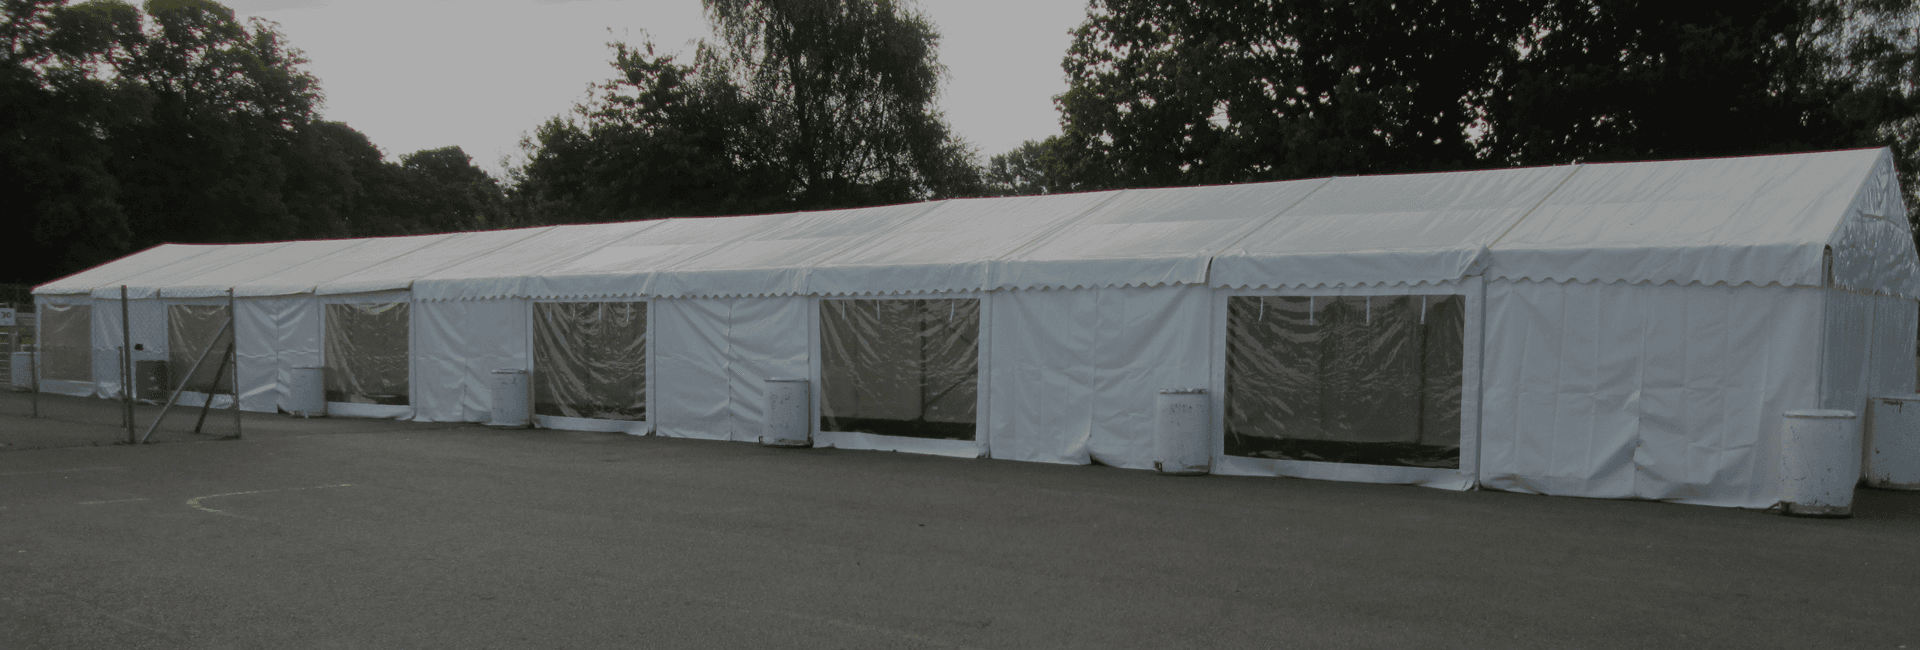 Social distancing marquee